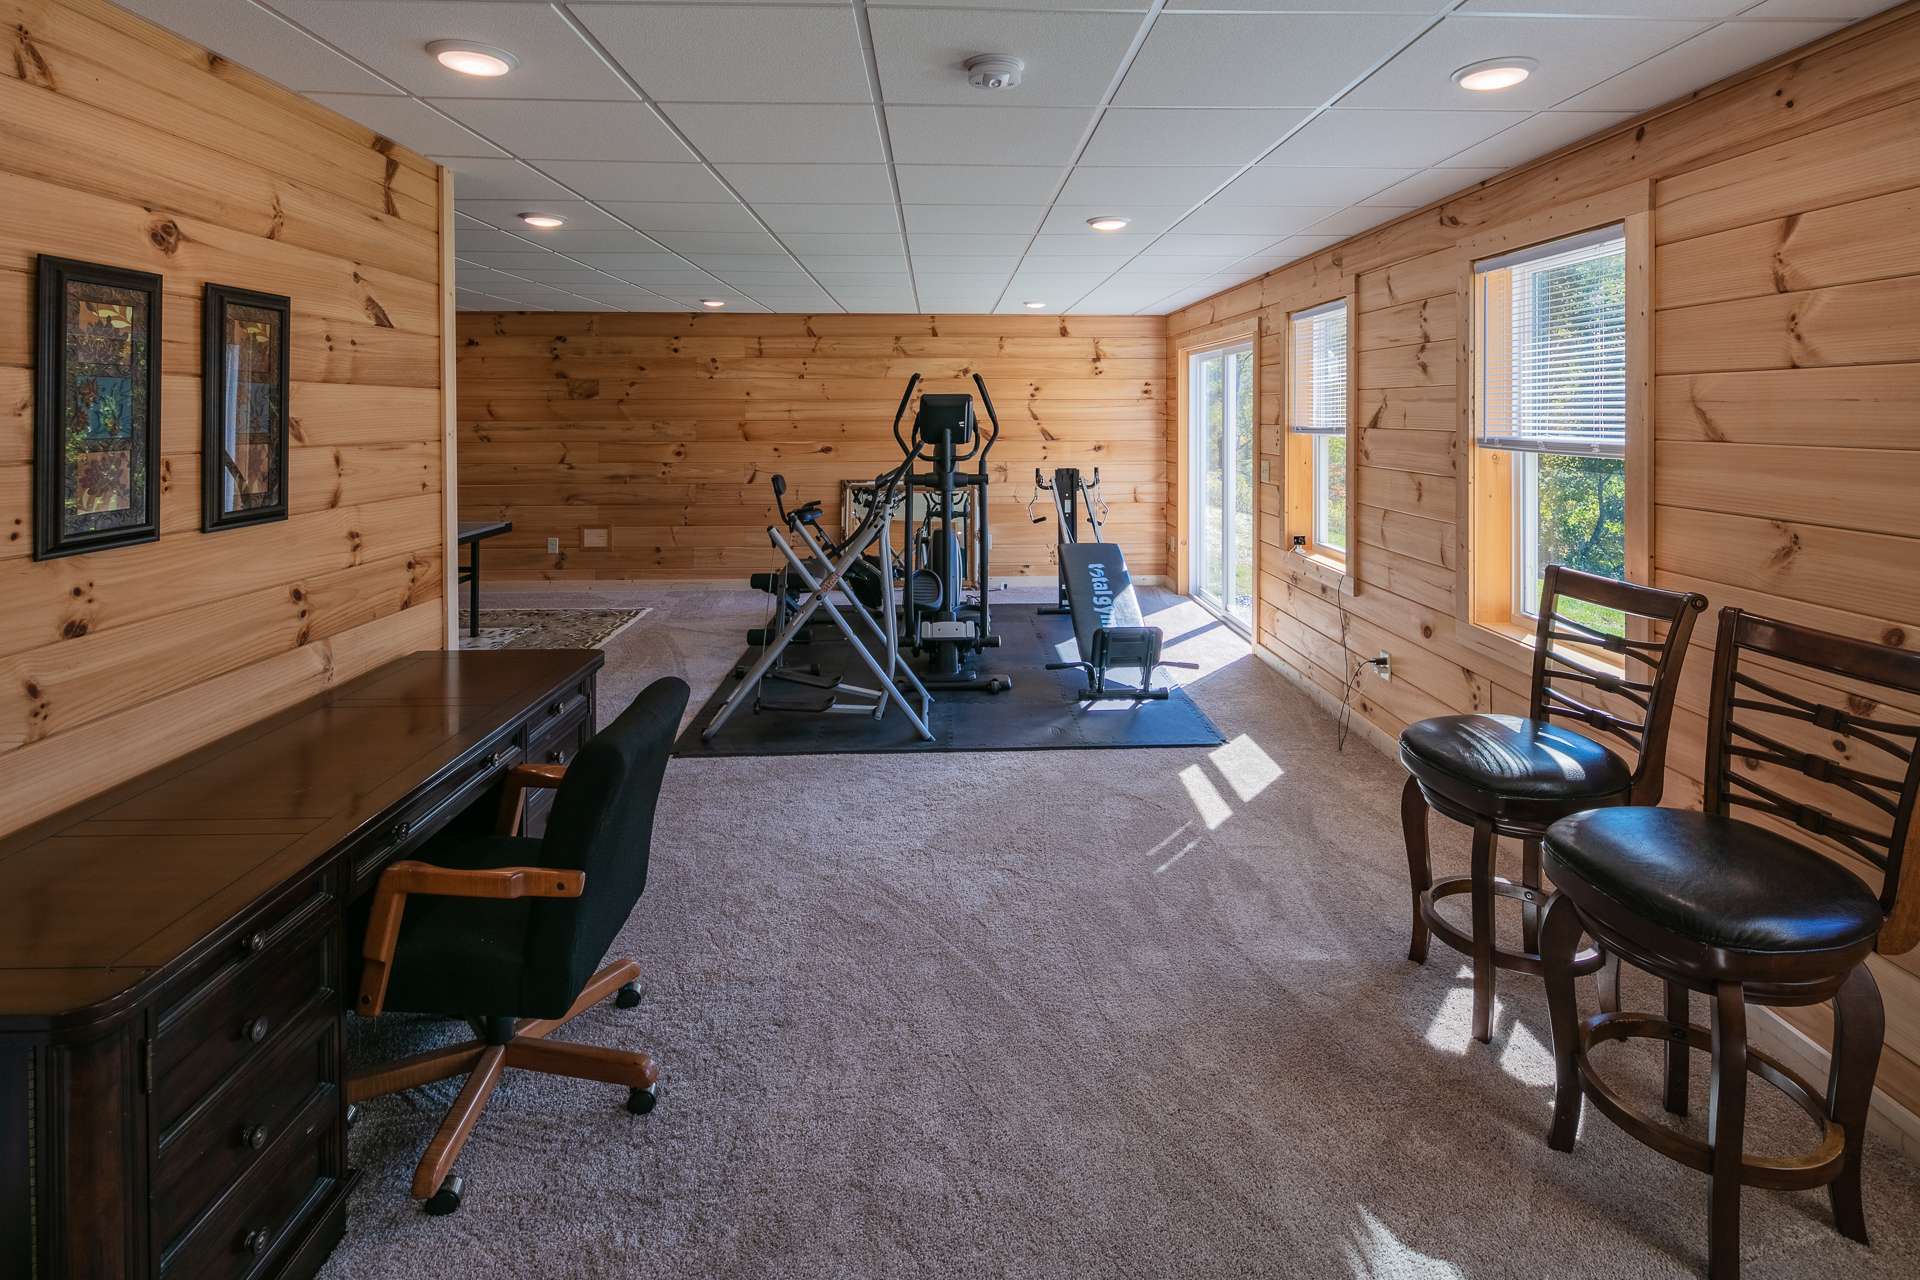 Perfect space for a home gym or game room.